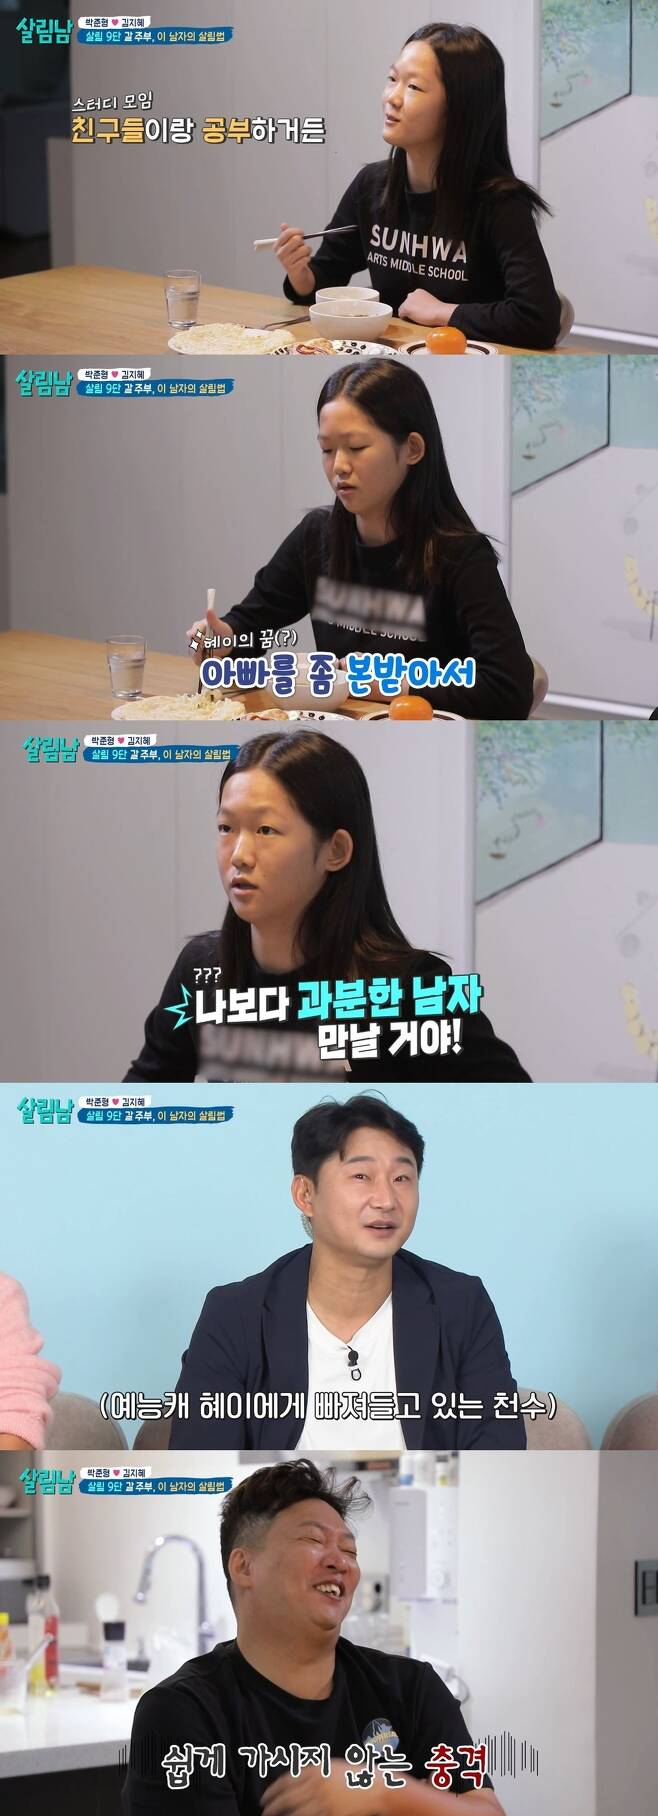 Joon Parks second daughter, Hye-yi!, Surprised Father with an extraordinary sense of entertainment.On November 4th, KBS 2TV The Living Men Season 2 (hereinafter referred to as salim nam) revealed the daily life of Joon Park and Kim Ji Hye.On this day, Joon Park unveiled a routine of making breakfast three times for his two daughters and his wife Kim Ji Hye, who goes to home shopping. Especially, the sharp talk of her daughter Hye-yi!First, my second daughter, Hye-yi!, Woke up at Dawn 5 oclock for a Dawn study meeting. Hye-yi!Hye-yi! I grew up and succeeded, and then I imitated my father and met a man who was more than me.In addition, Hye-yi! Why do not you get angry with Father even though you are a teenager? Asked Joon Park. Father is a menopause, too. Im afraid to touch it.Lee Chun-soo of the studio said, The conversation is very touching. The second one is really funny like that. The color is clear.